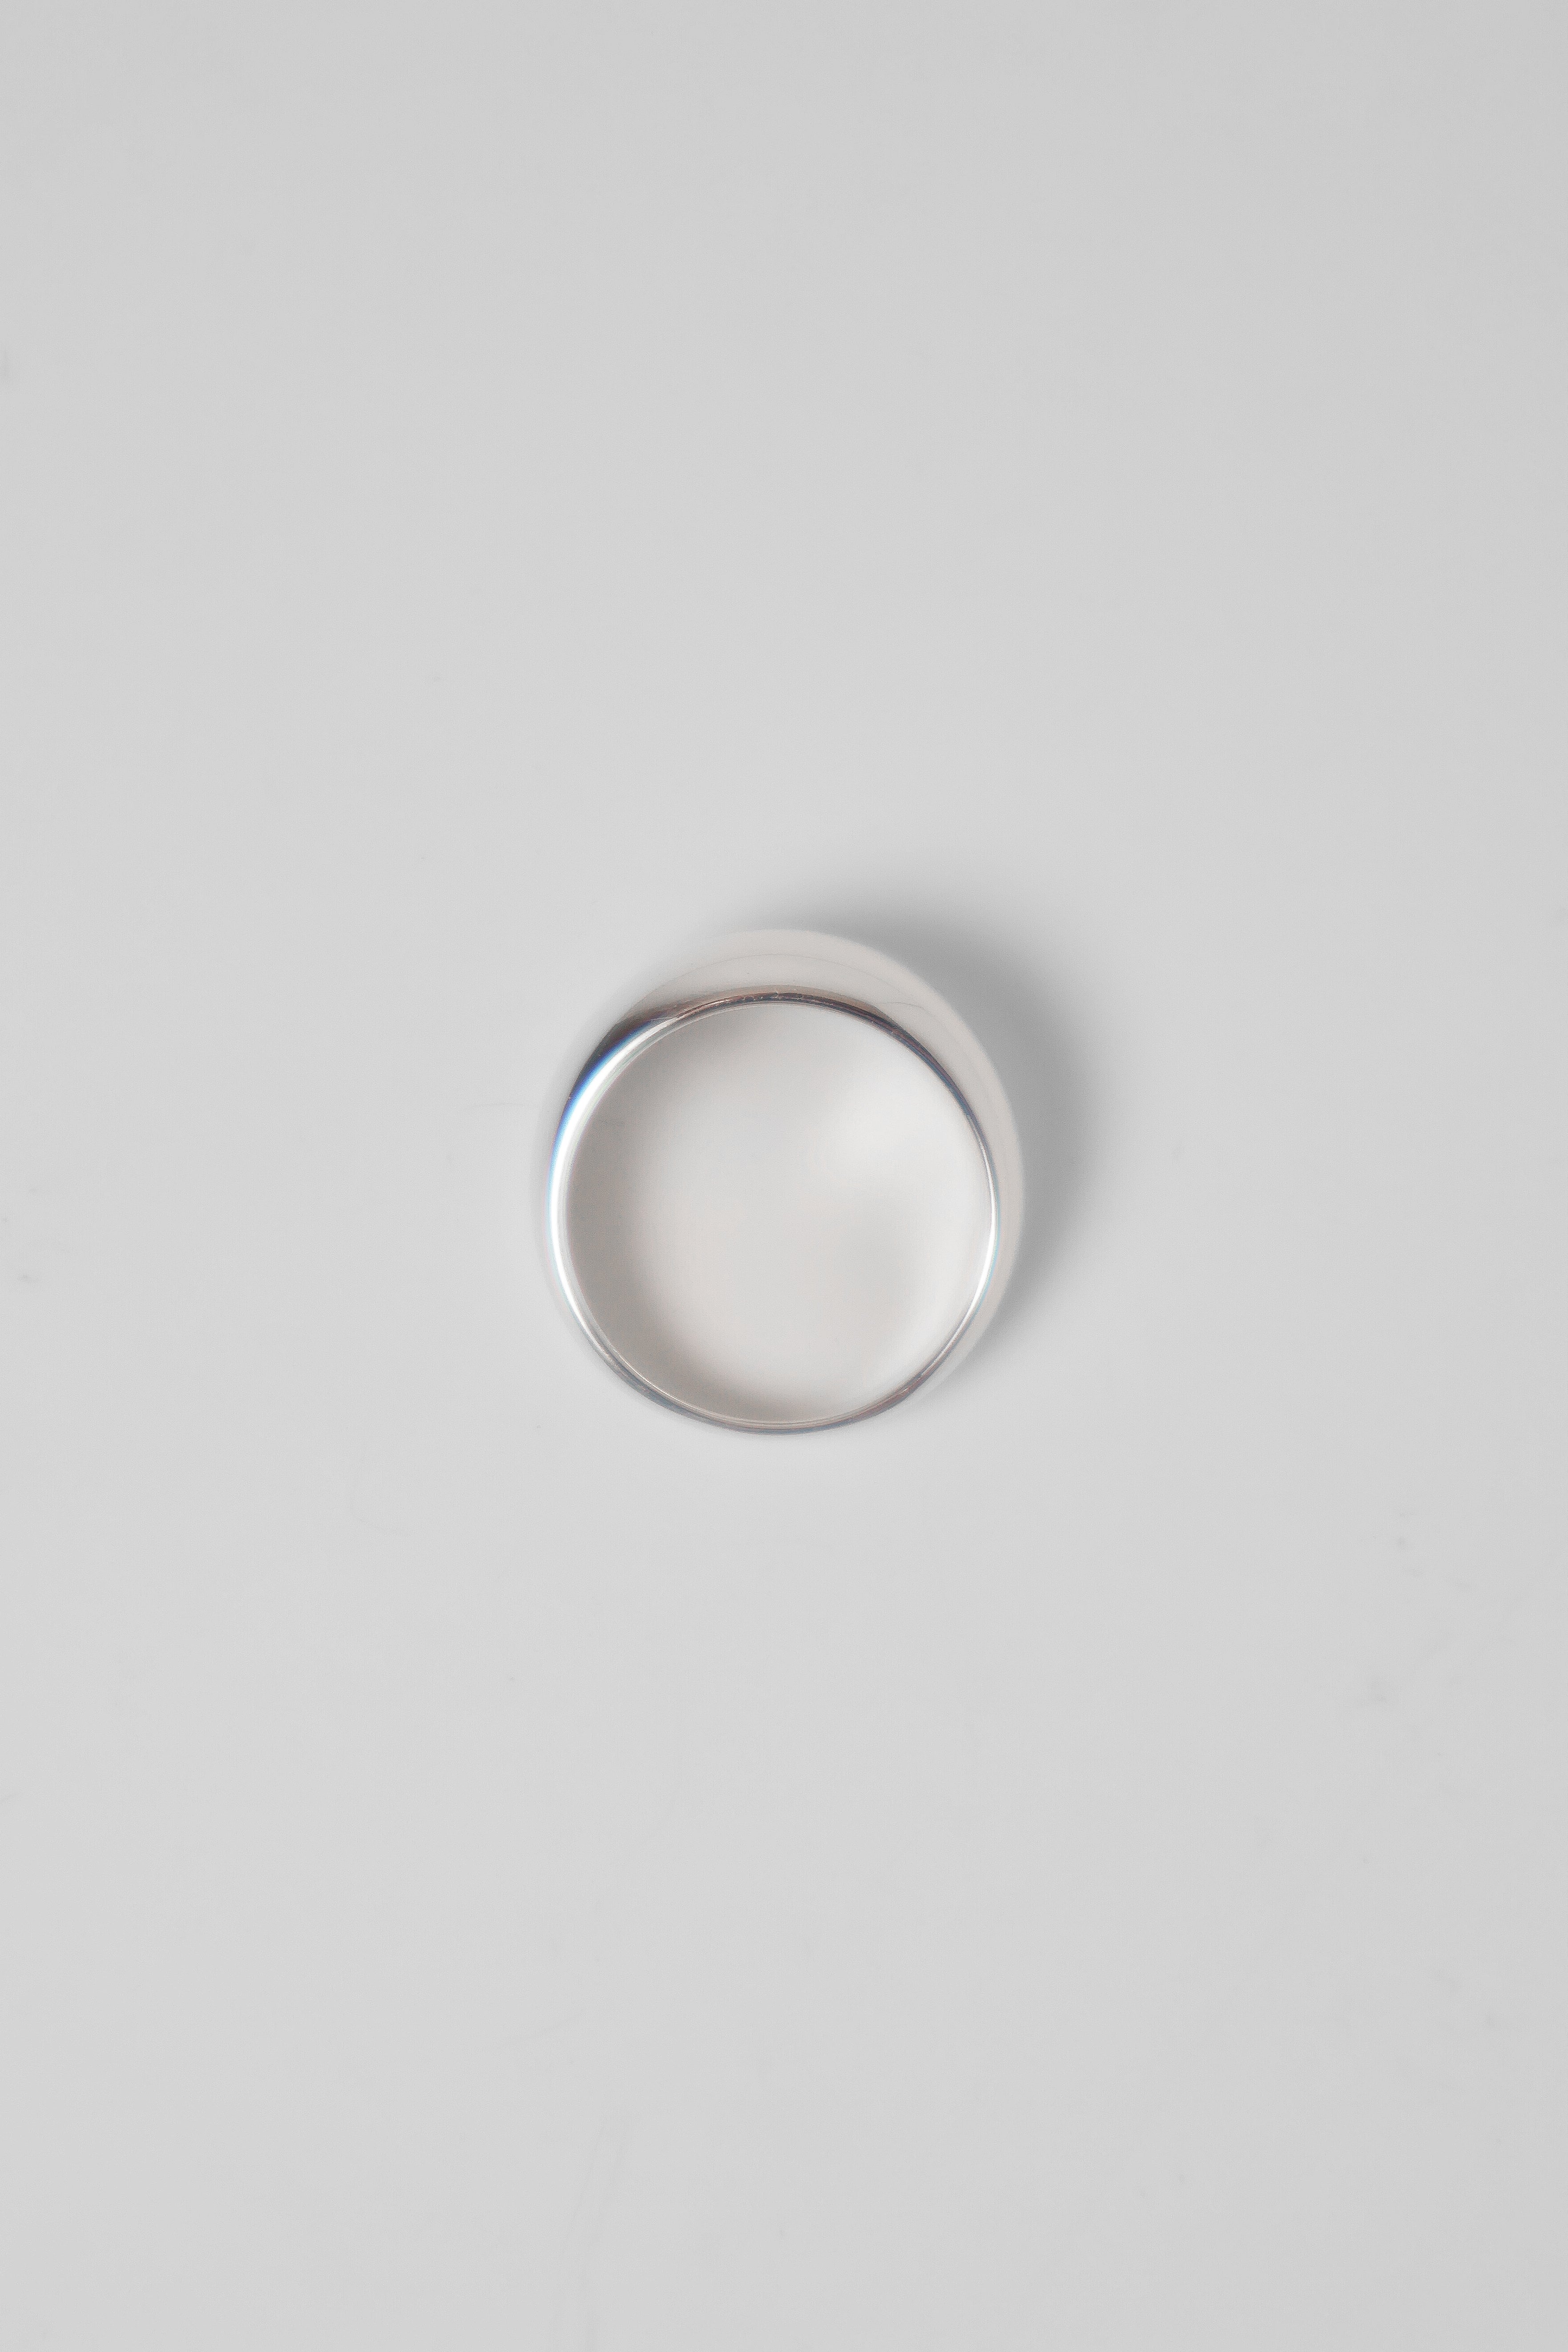 Large Domed Ring | $149